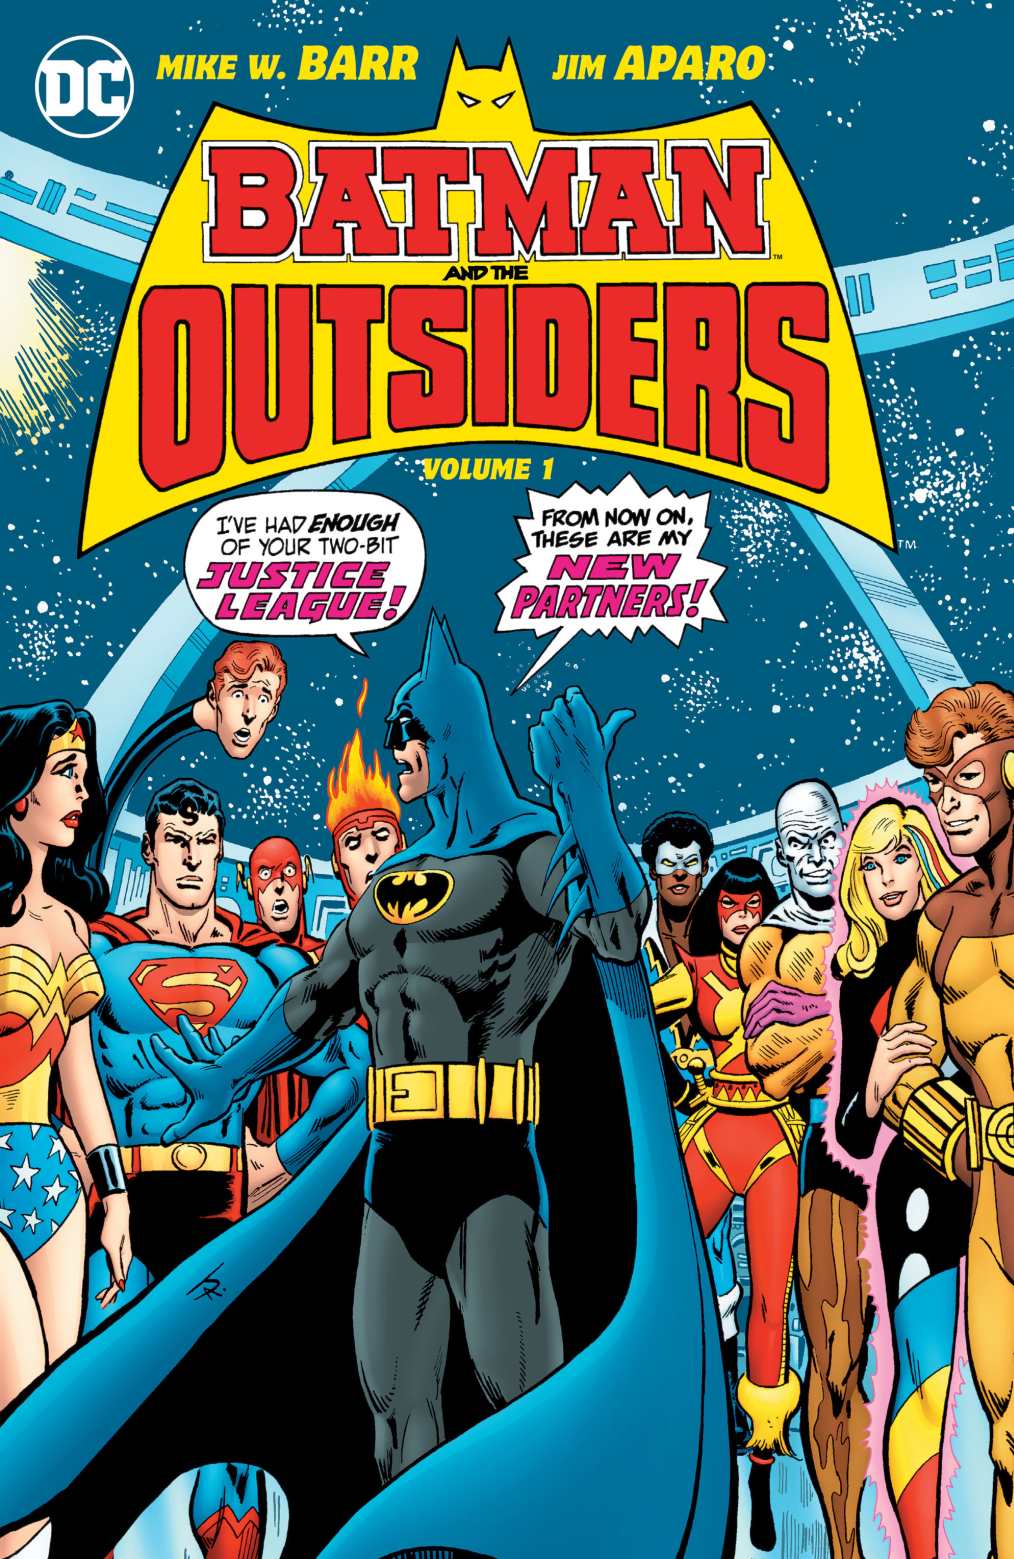 Read Comics Online Free - Batman and the Outsiders (1983) Comic Book Issue  #001 - Page 1